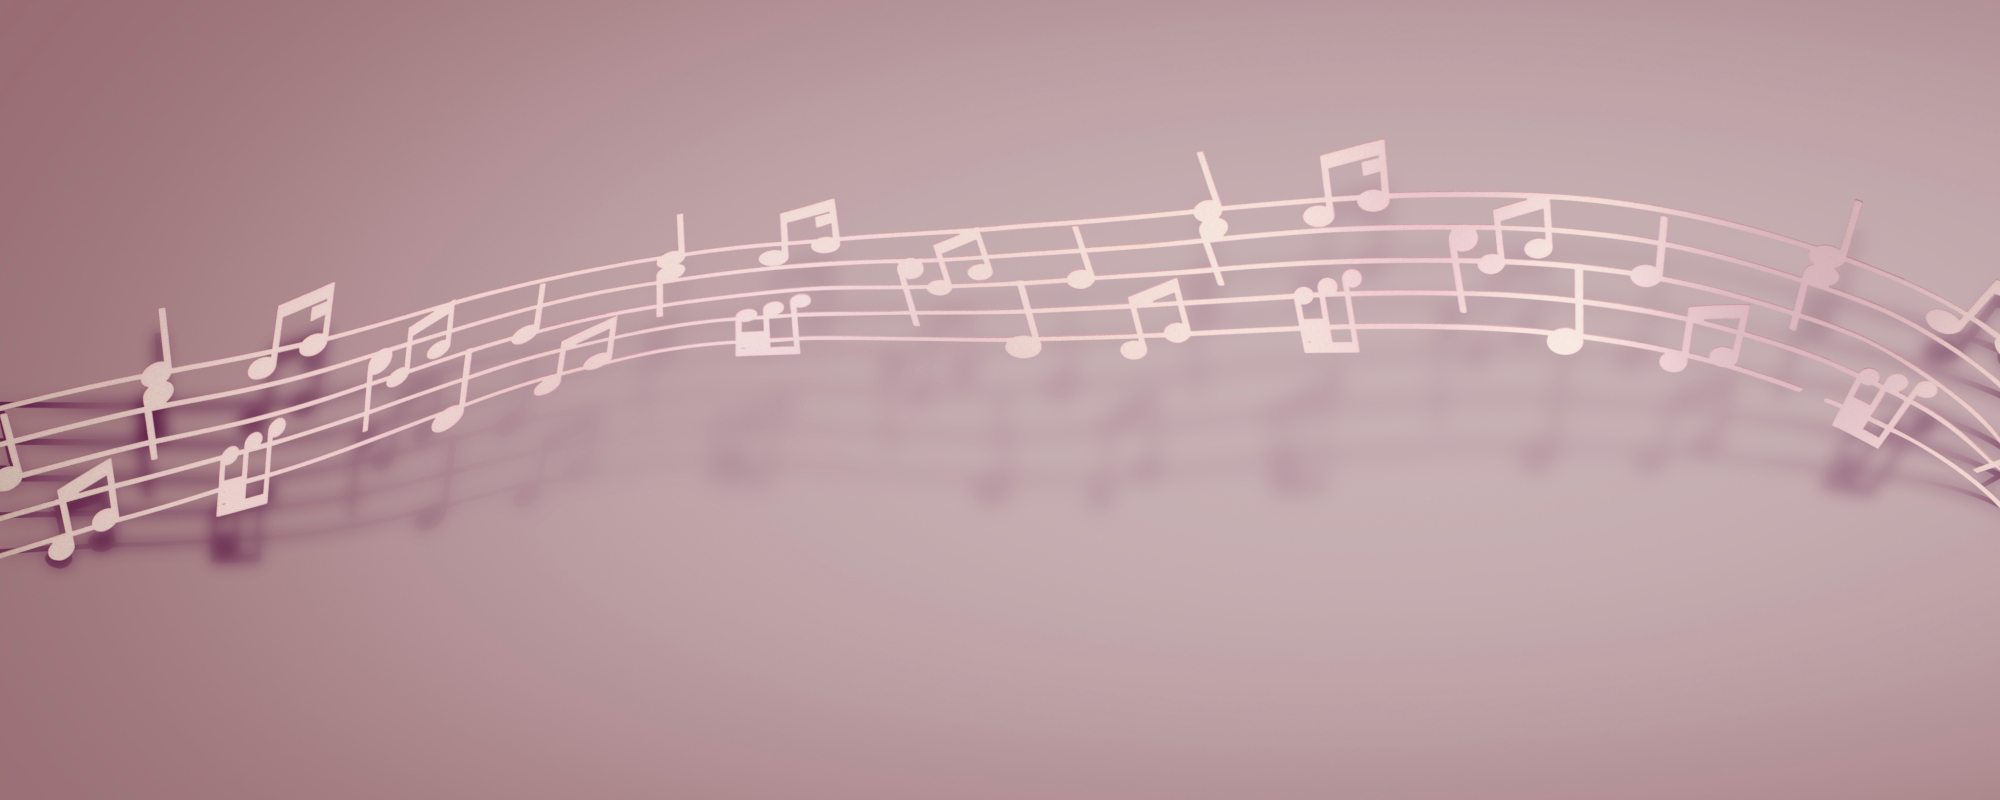 Wordle Launches New Game for Music Lovers Called “Heardle”: Play Now